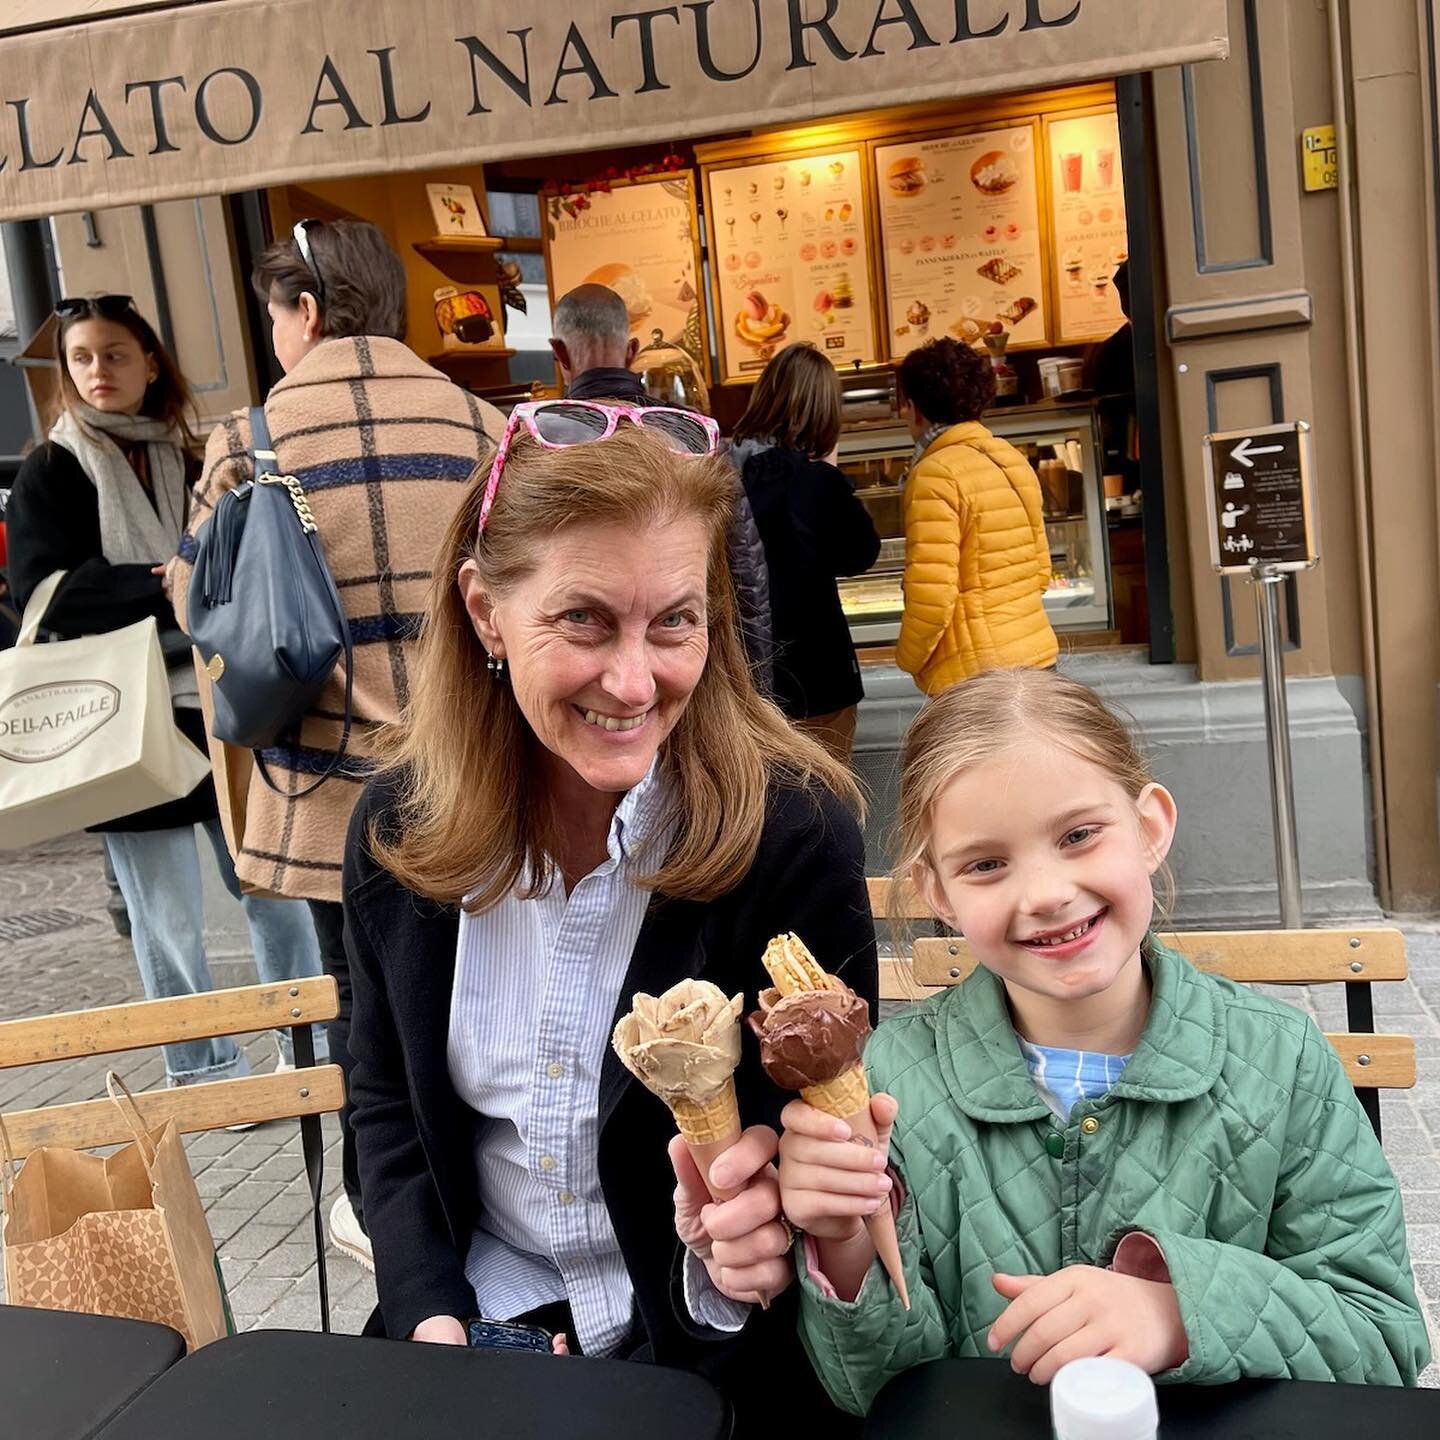 Gelato with one of my favorite people! Traveling is educates while making lifelong memories.  Antwerp, Belgium  Where was your first international trip to? 🌎 🧭 Travel-Lyn LLC 
#lovetravelleyn

.
.
.
#celebratewithtravel #traveleducates #liveeachday